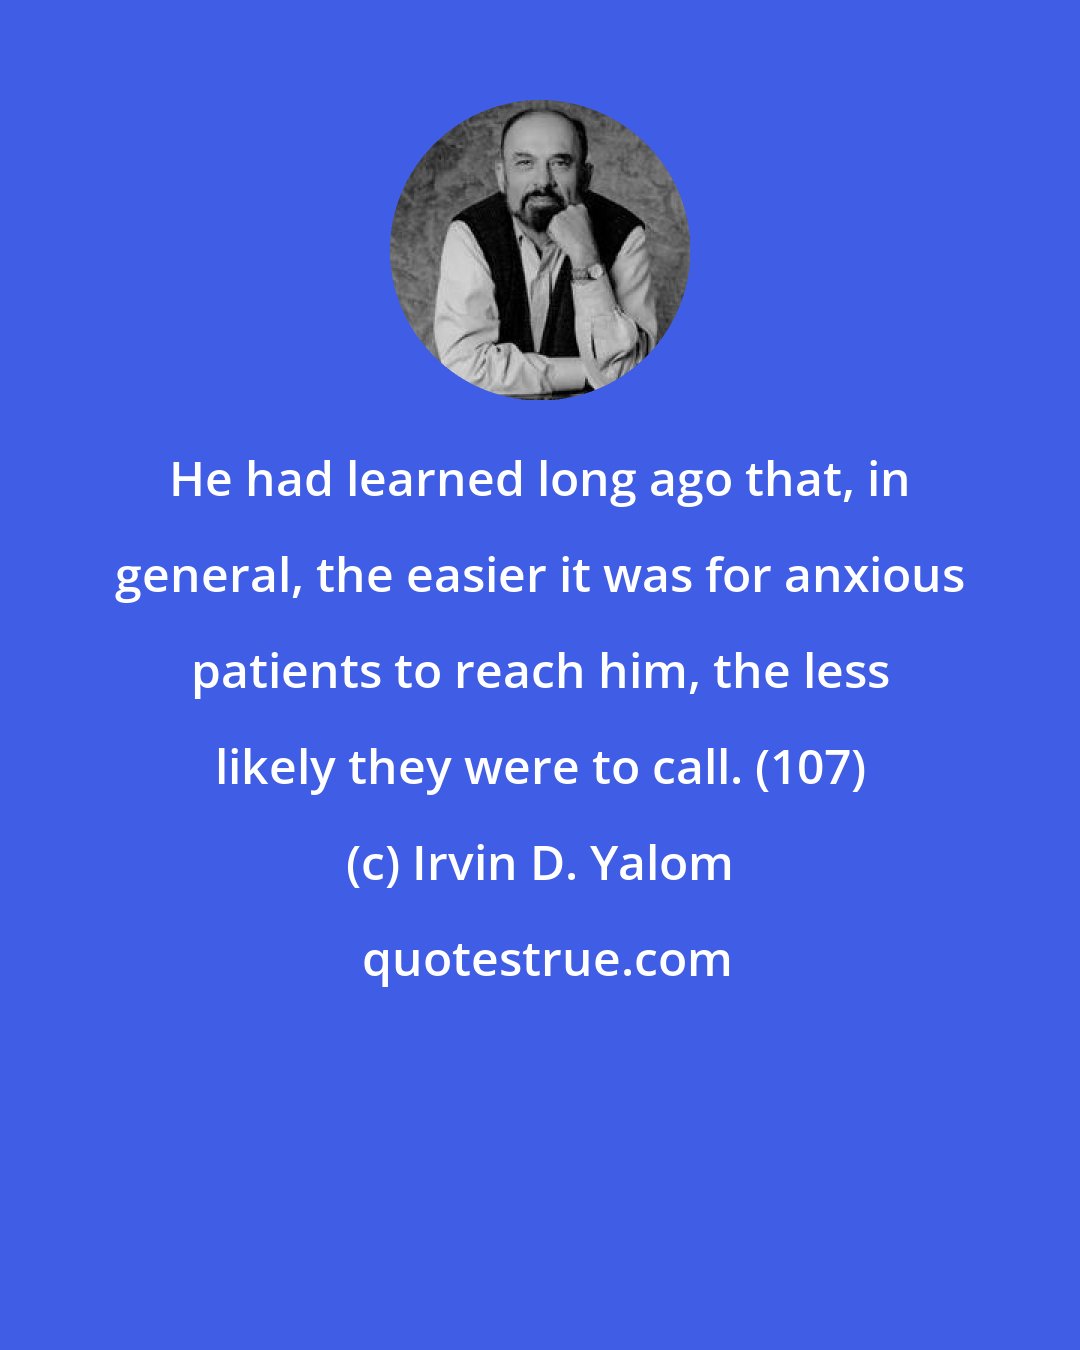 Irvin D. Yalom: He had learned long ago that, in general, the easier it was for anxious patients to reach him, the less likely they were to call. (107)